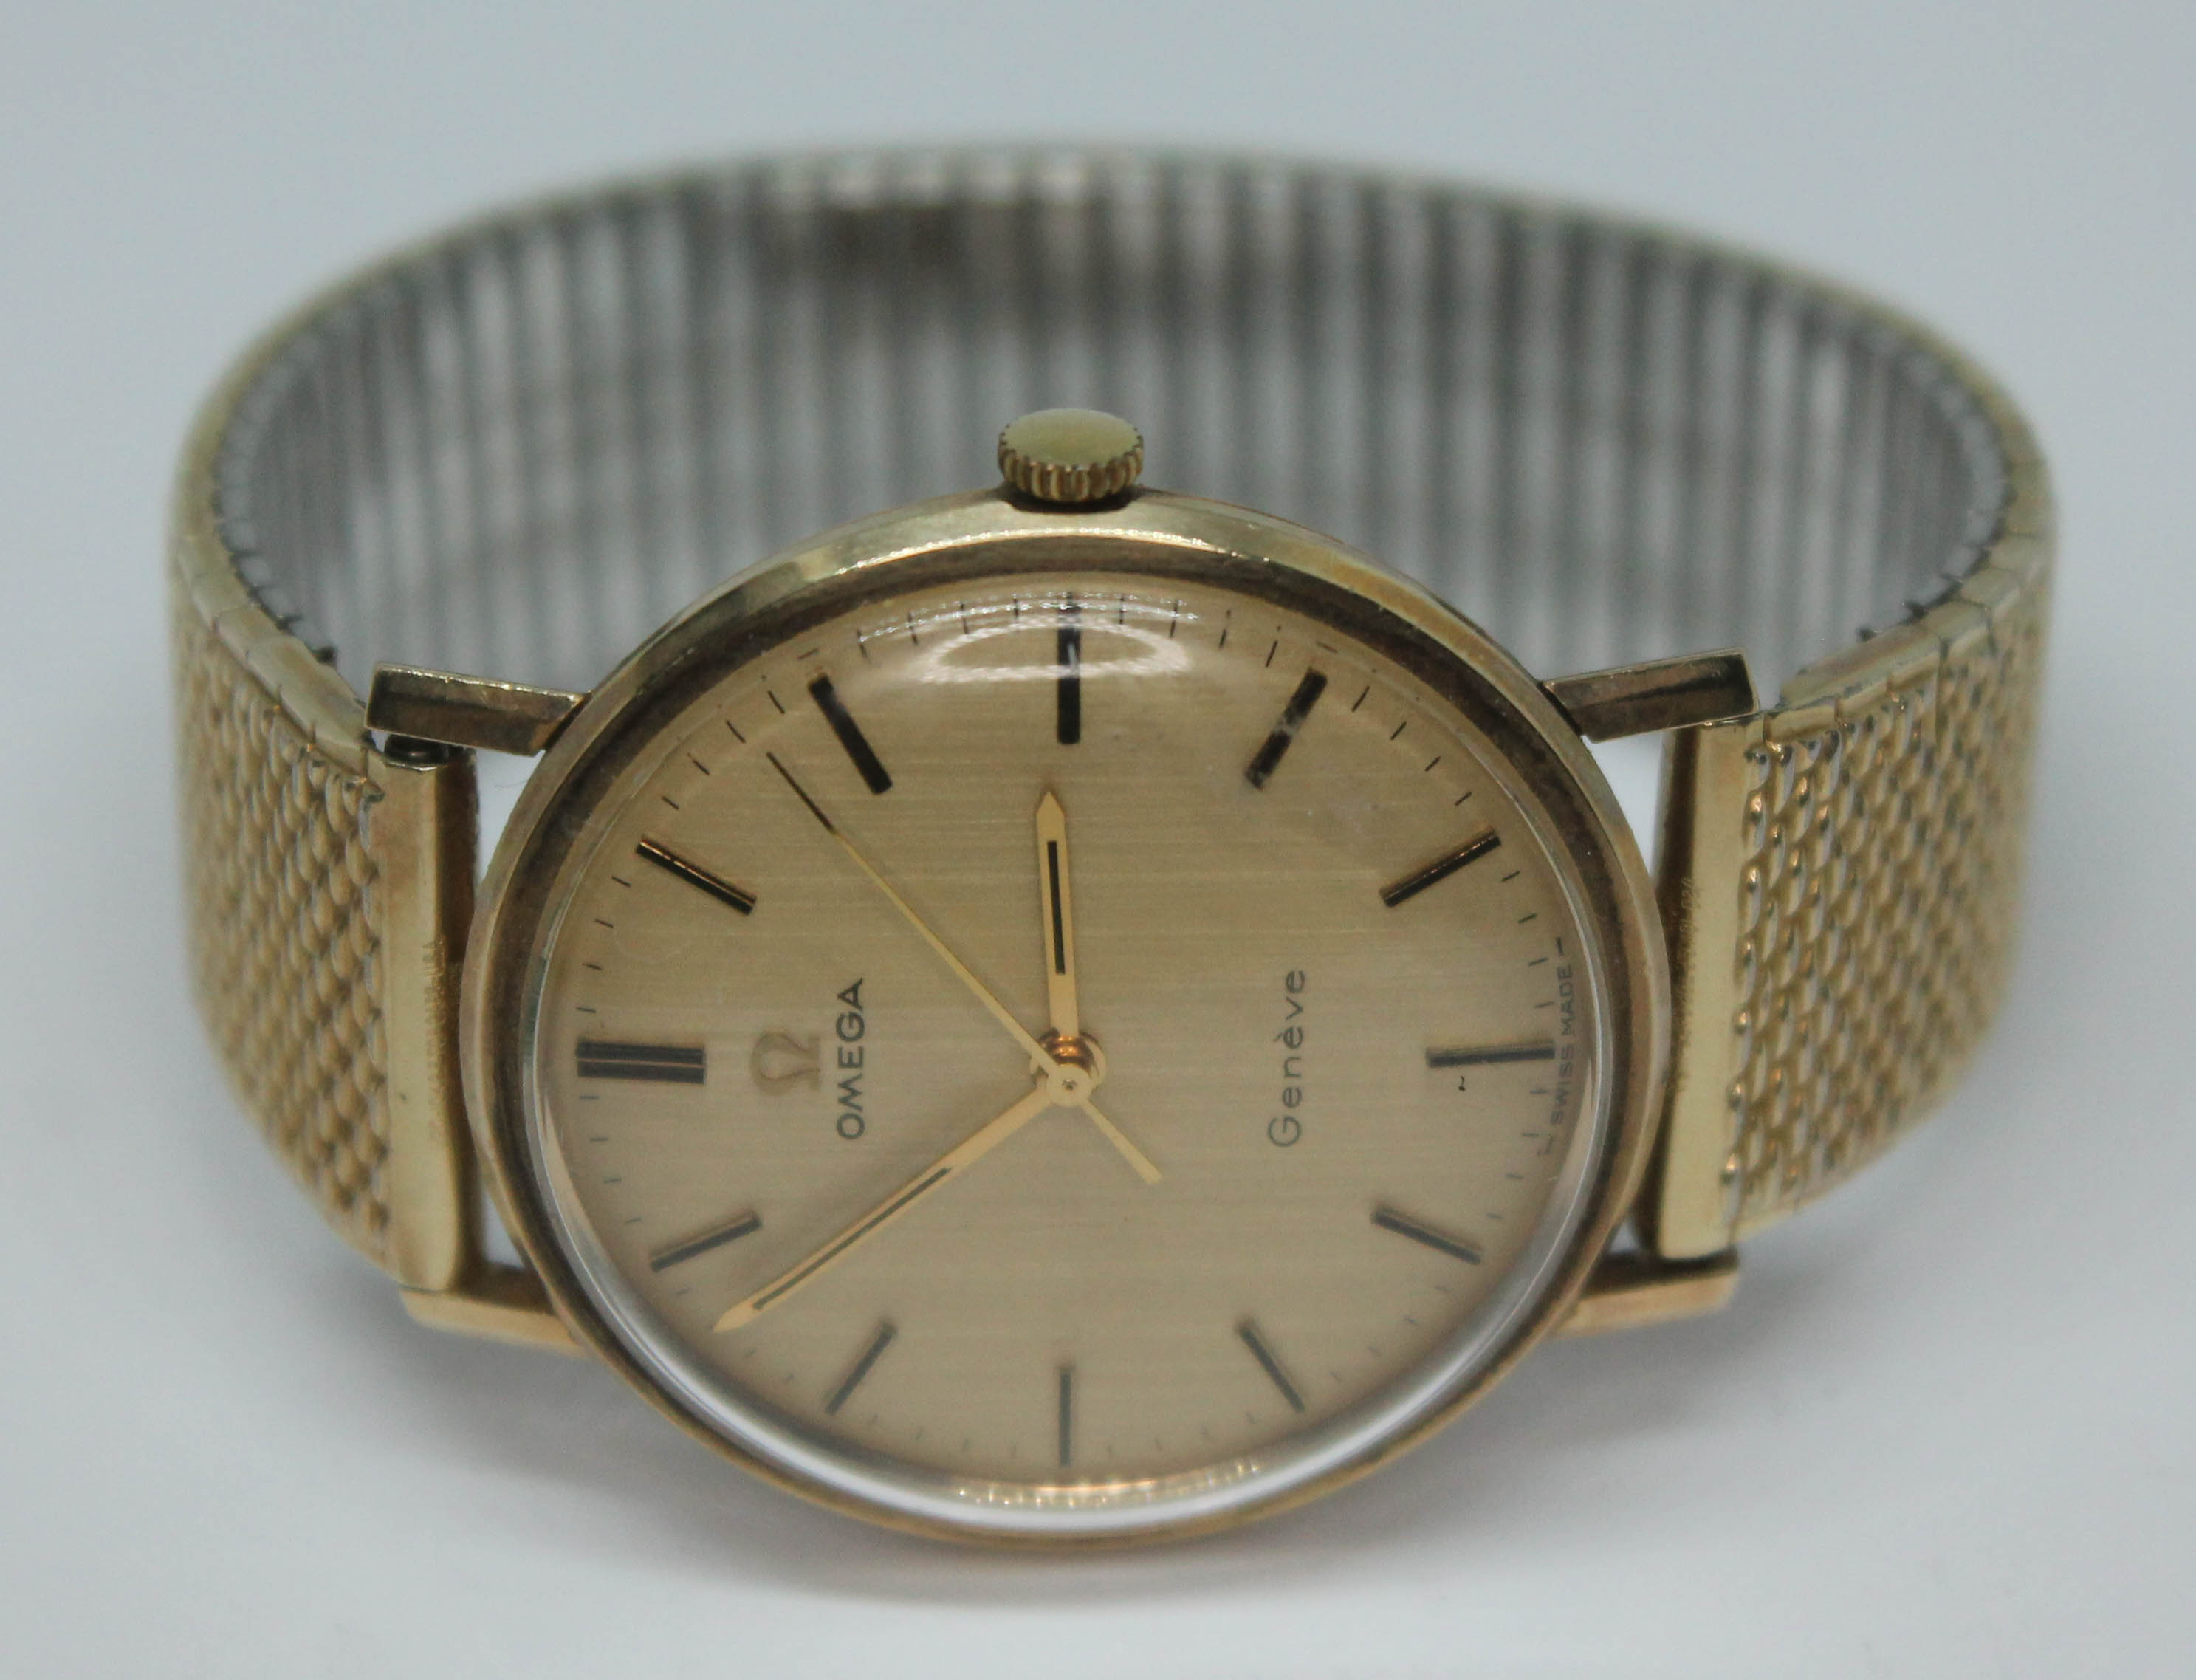 A 1969 hallmarked 9ct gold Omega Geneve 131.25016 wristwatch, with signed gold tone dial, hands and